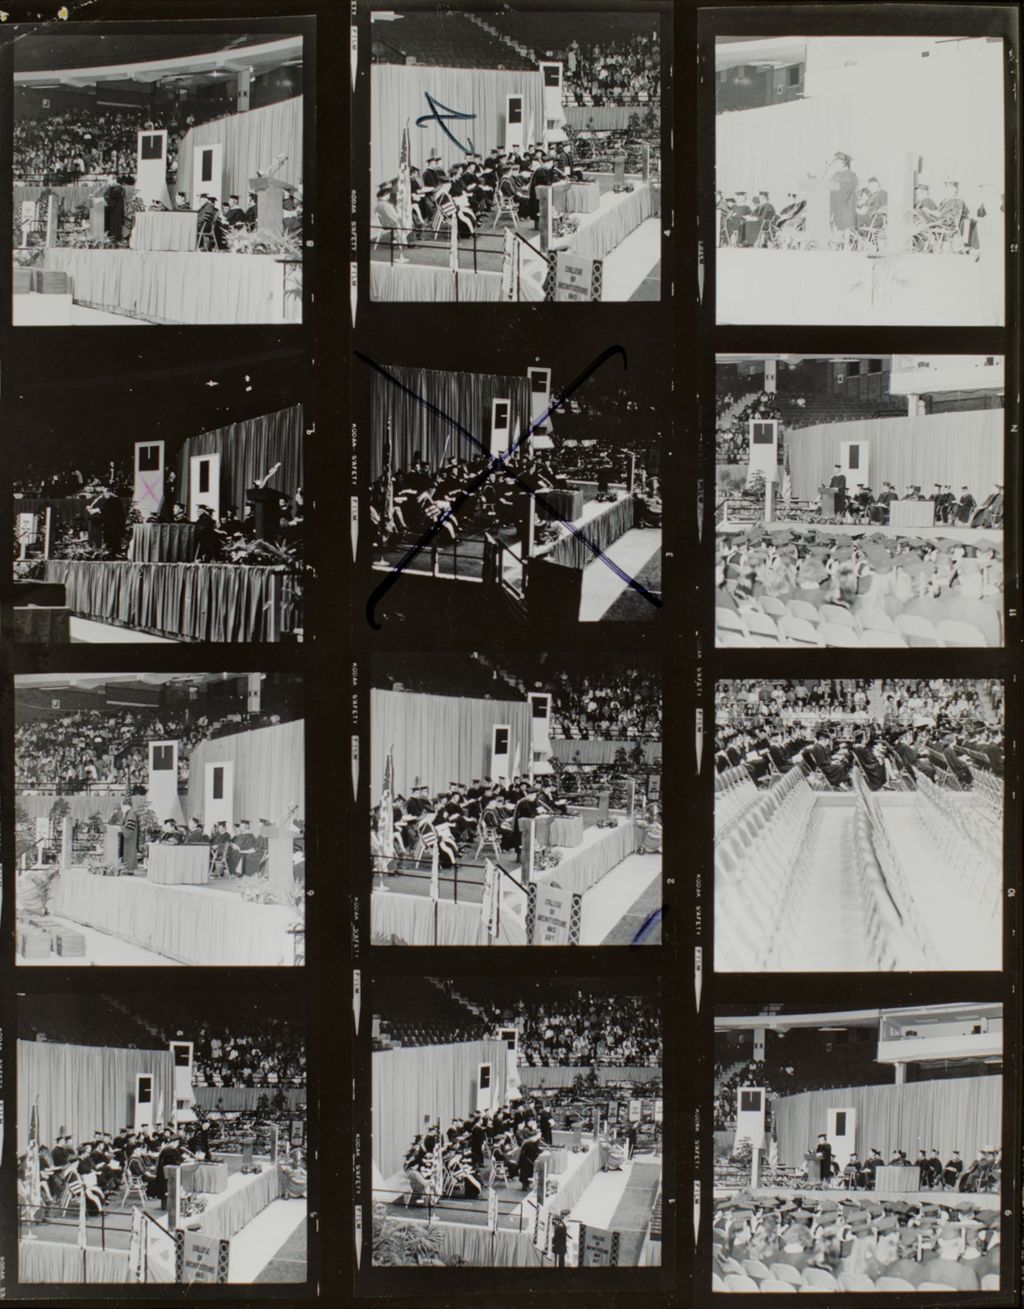 Multiple images of the graduation ceremony